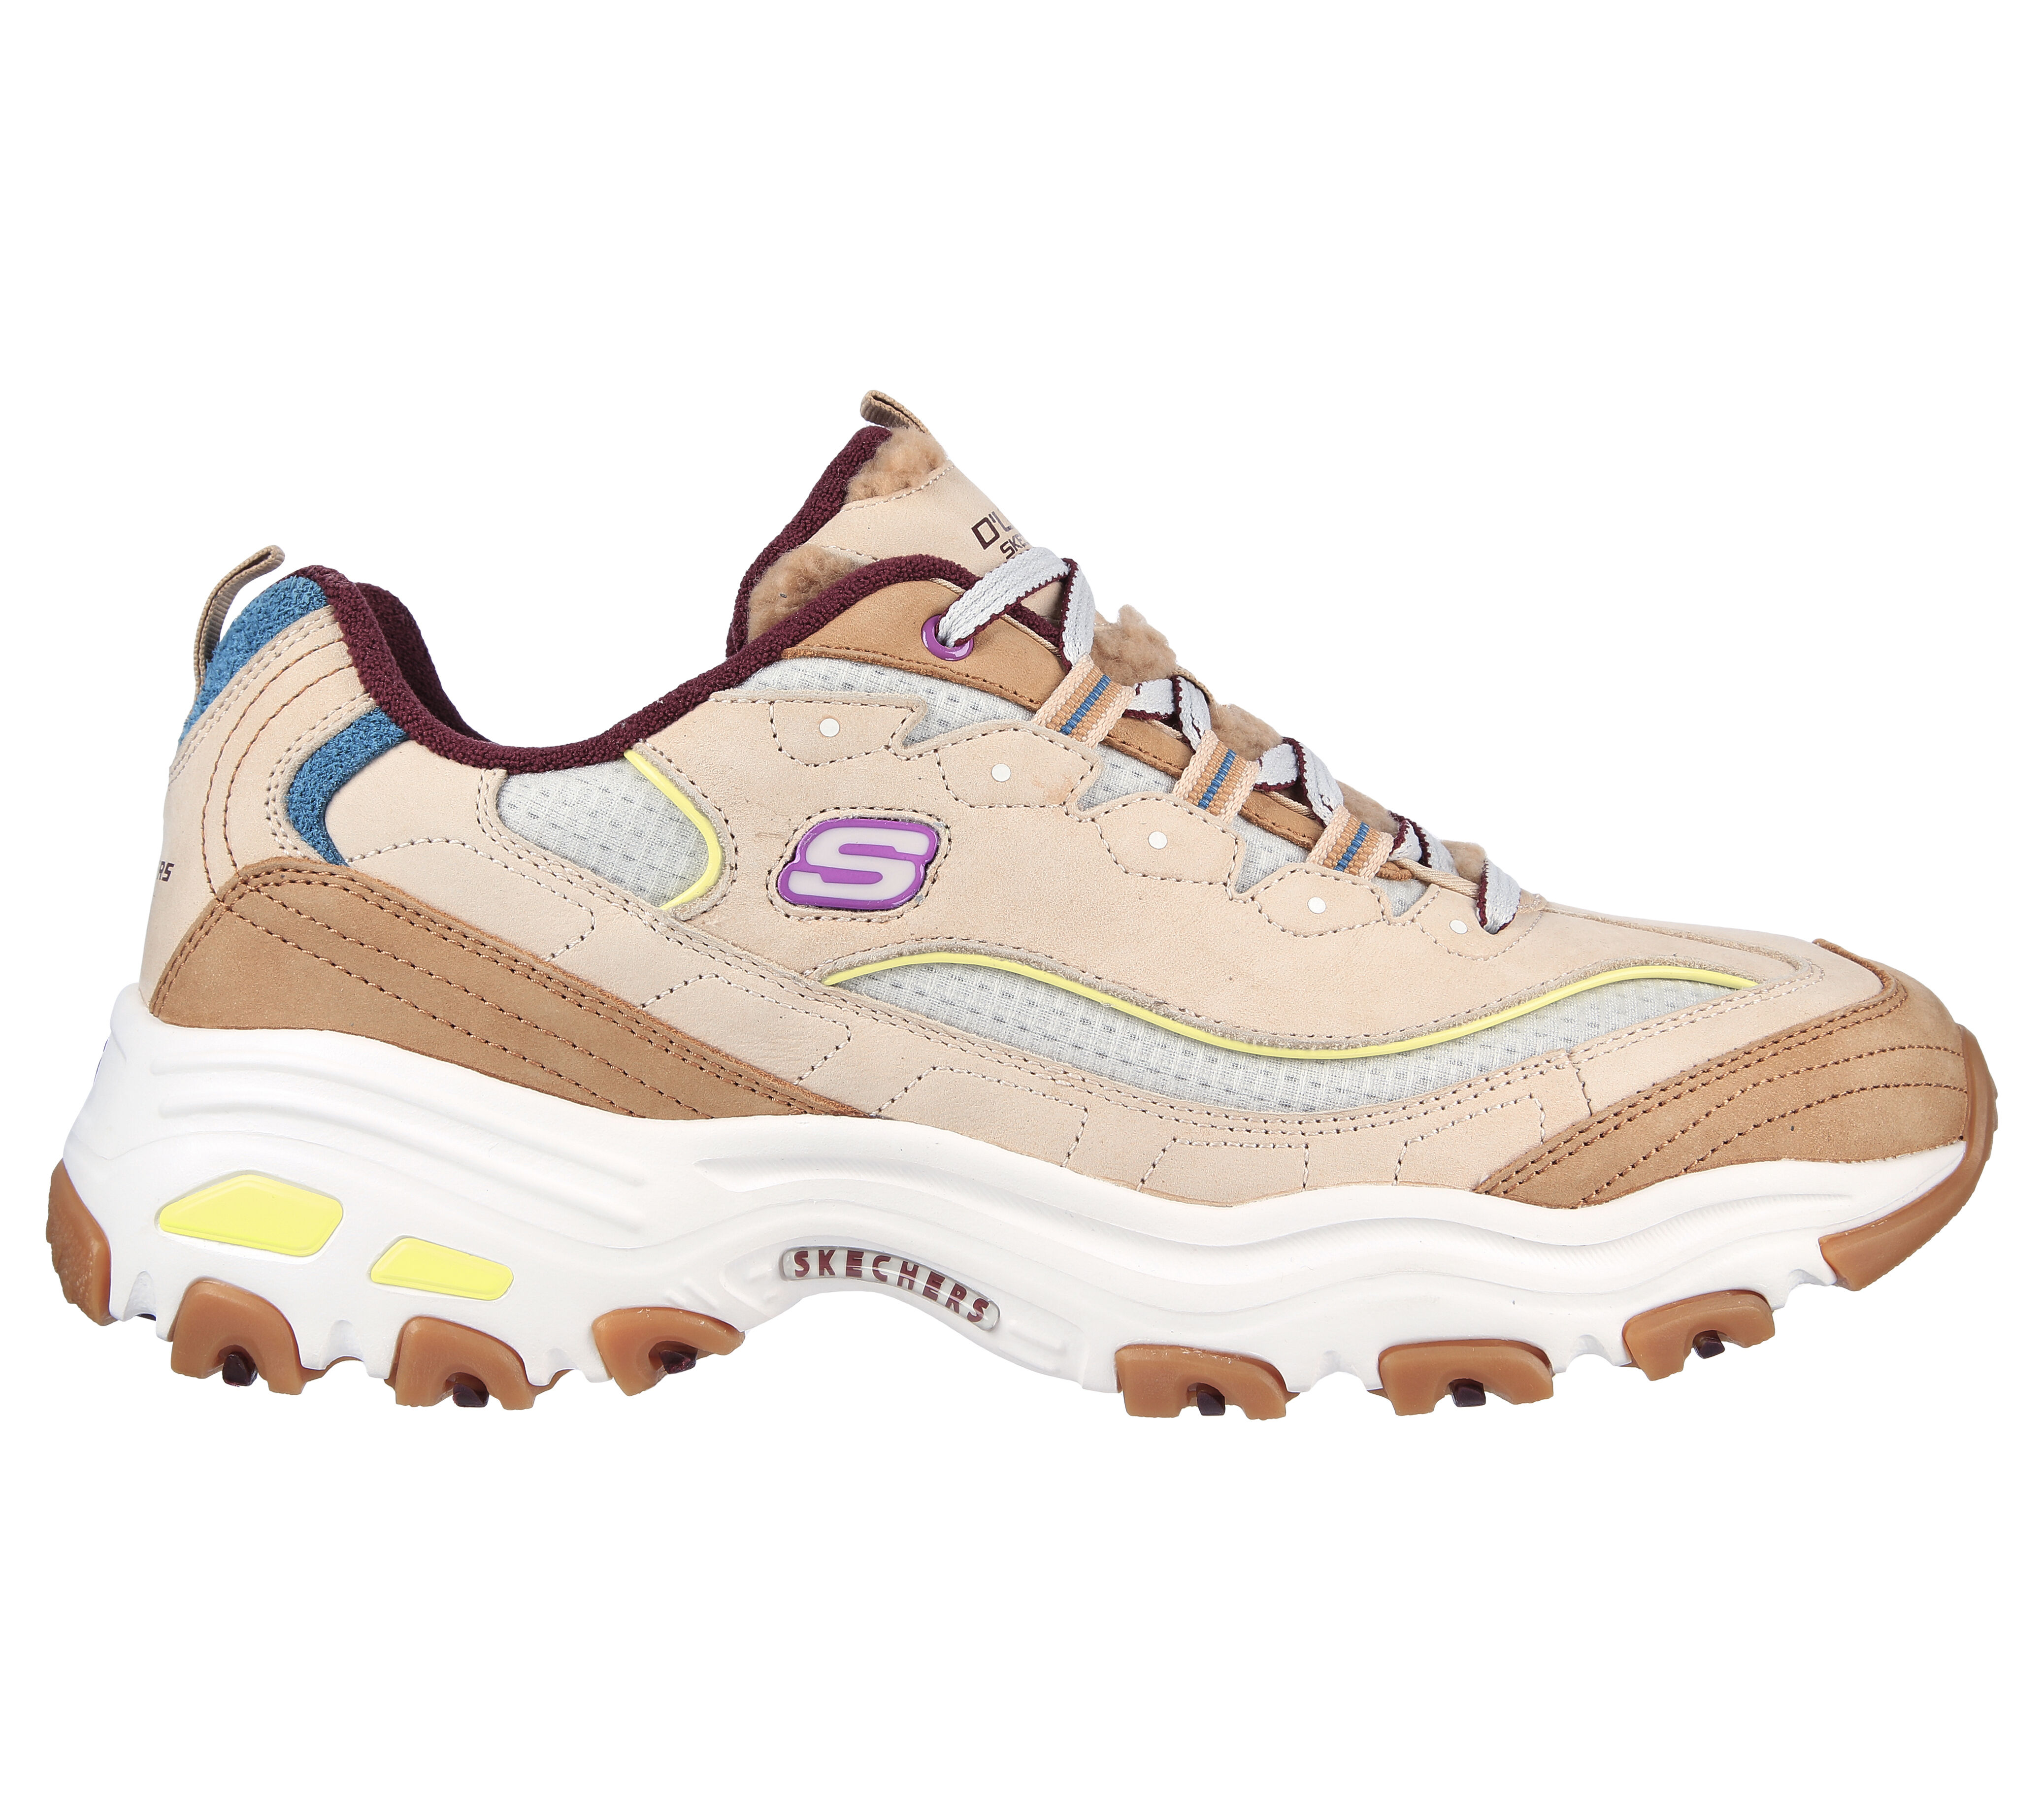 skechers shoes latest